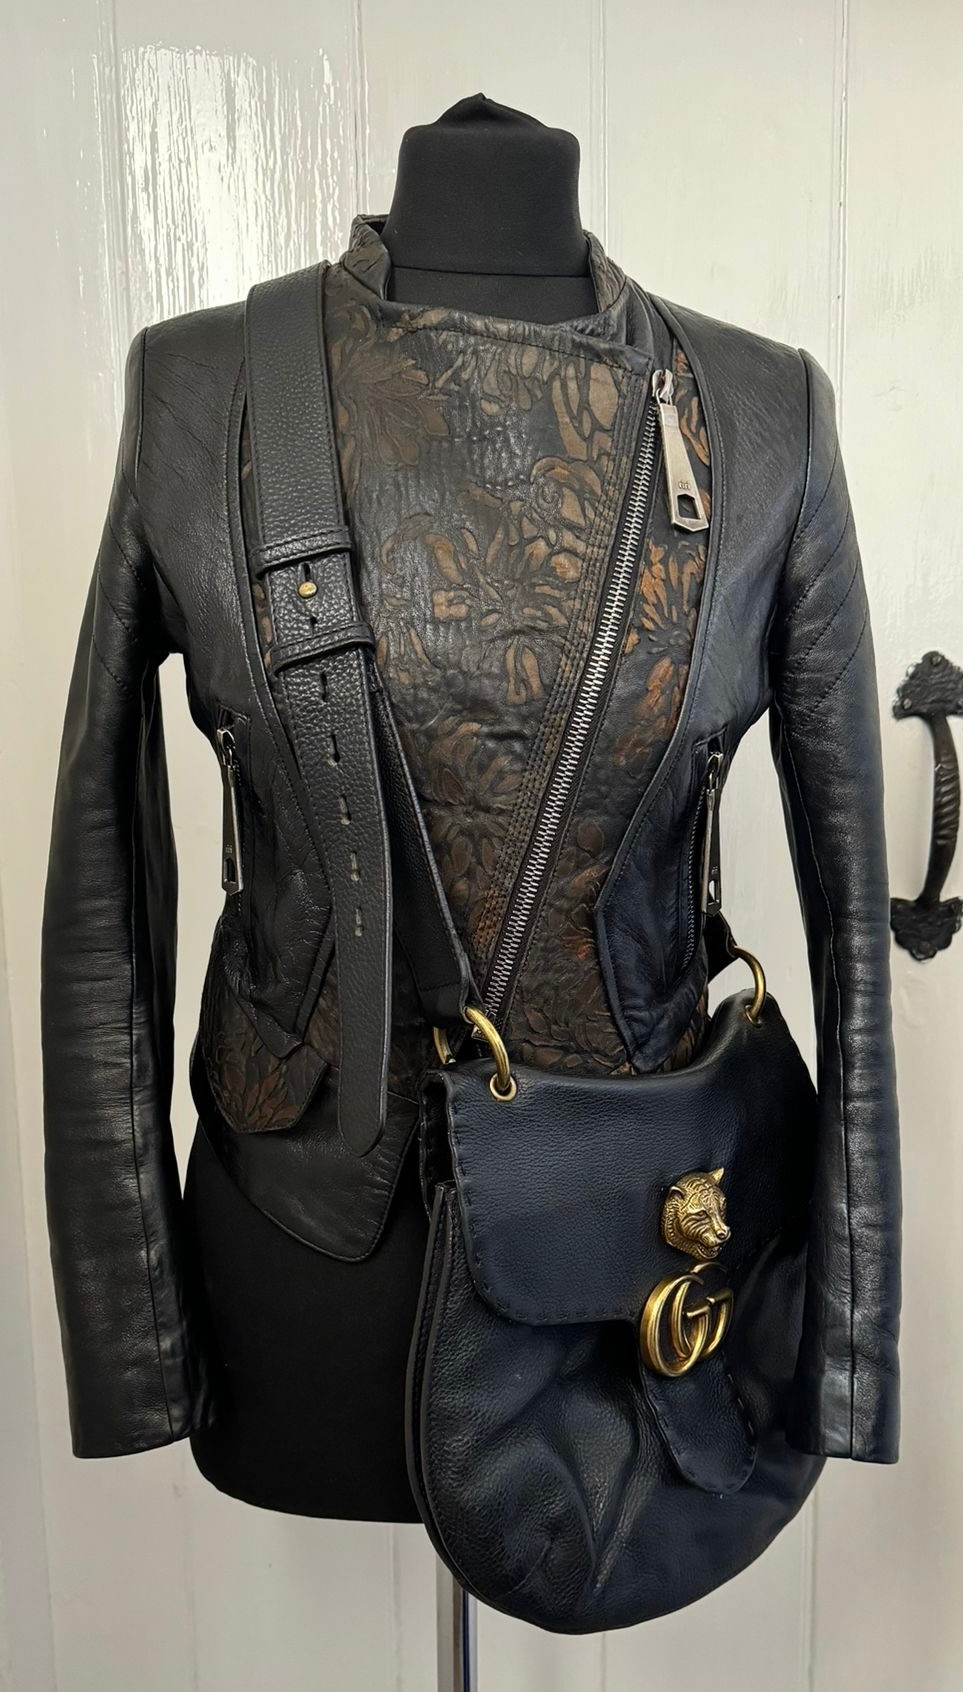 A real black leather jacket by Deja - Vu along with a genuine black leather Gucci Marmont bag. - Image 11 of 11